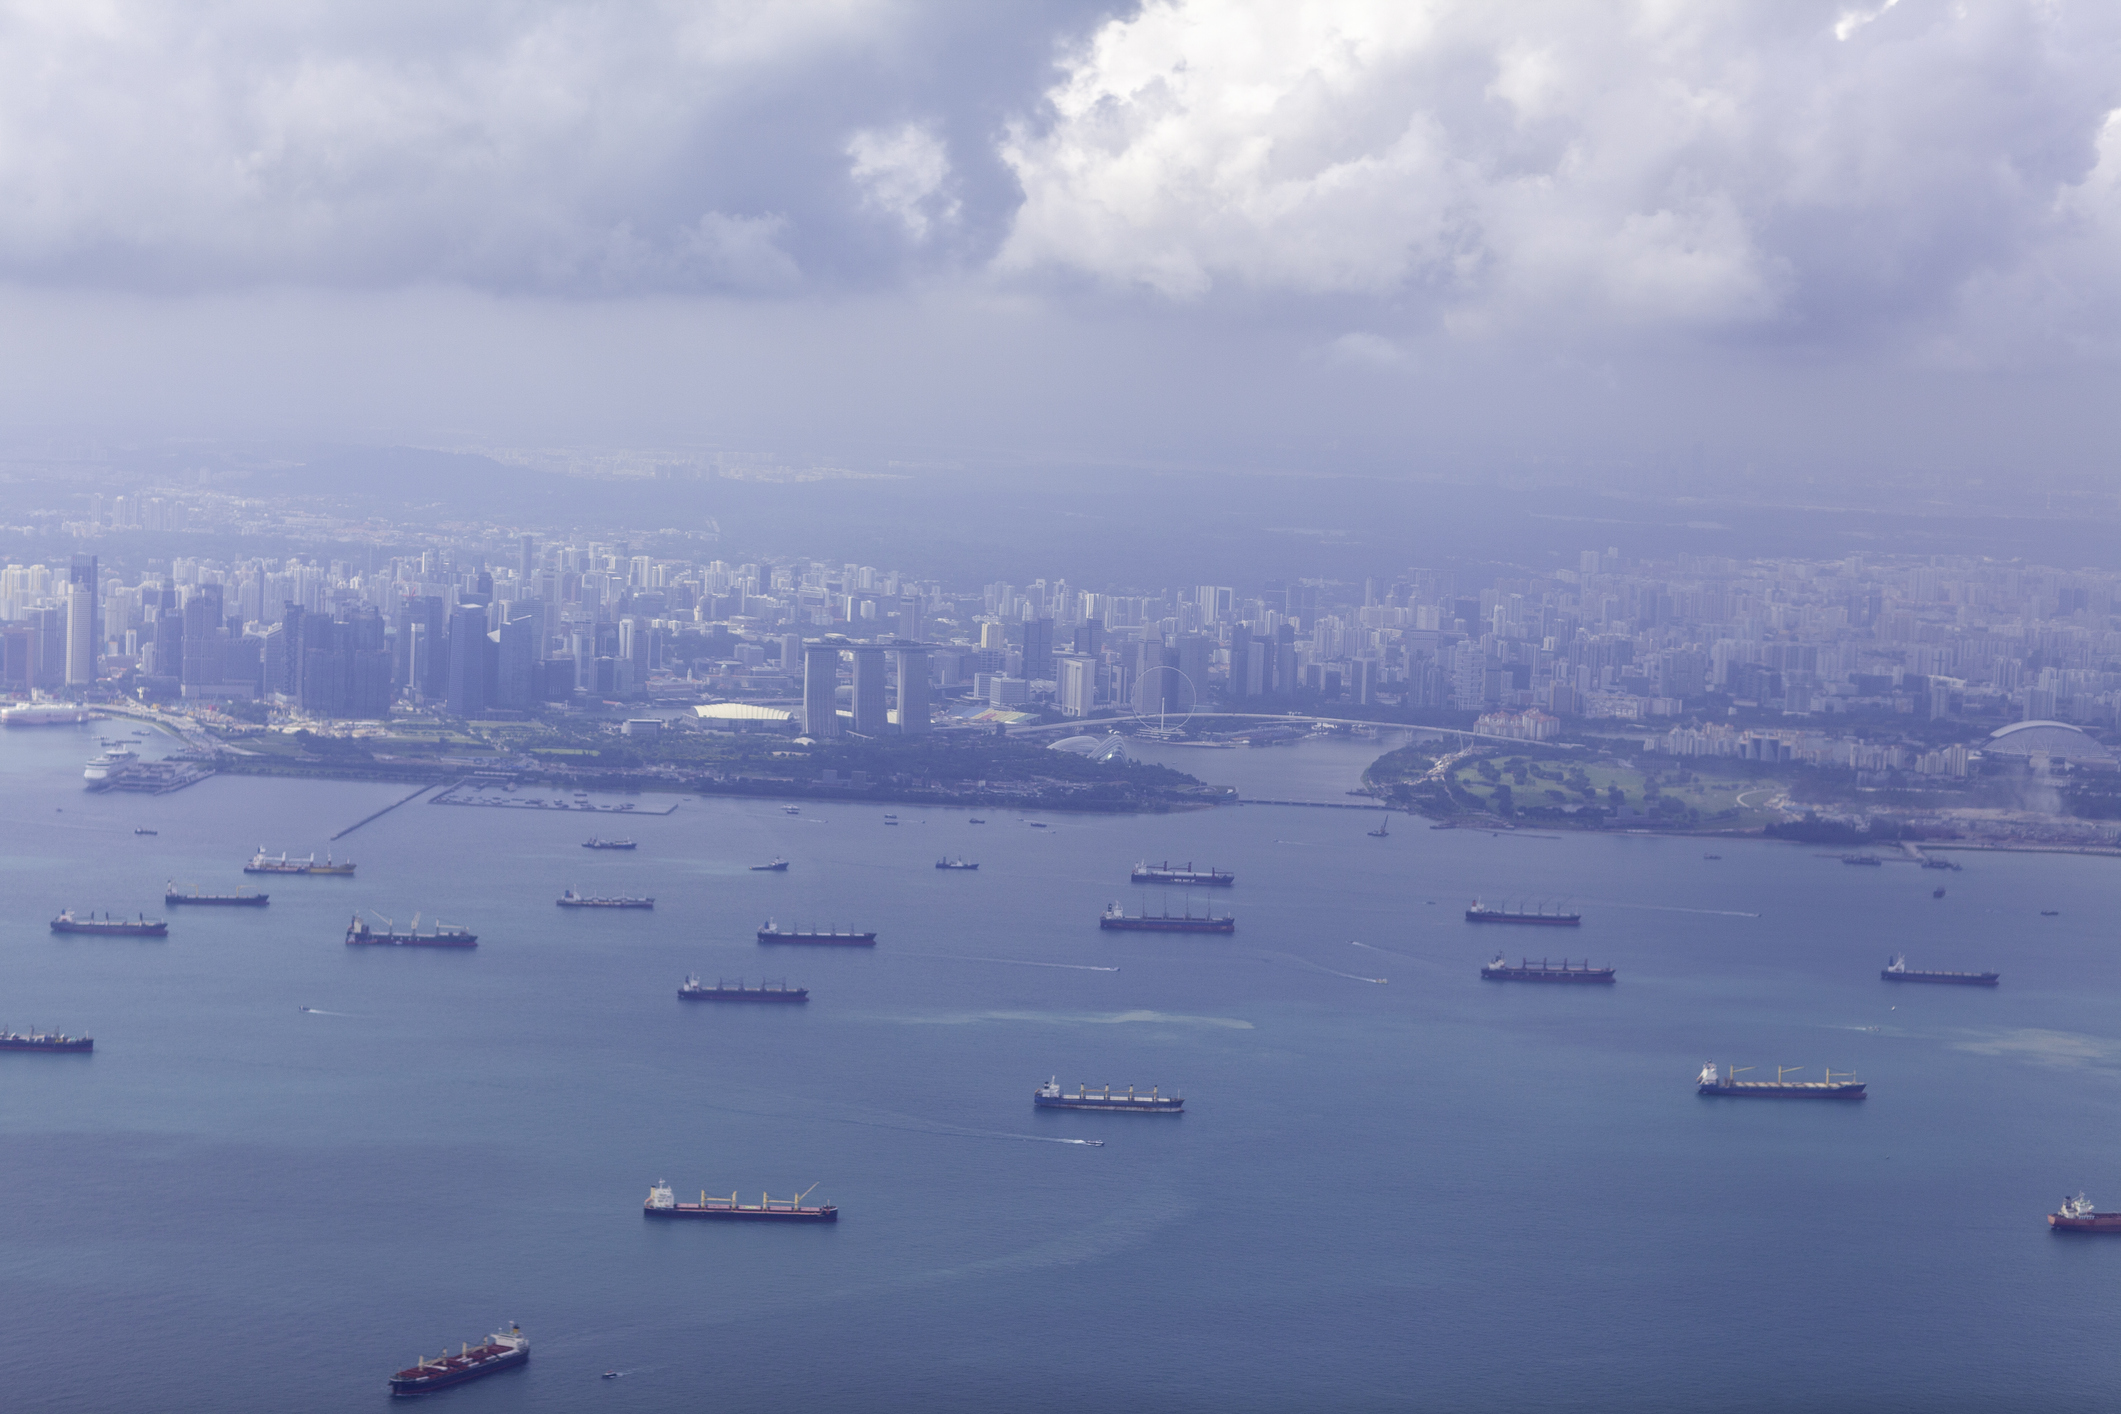 42 armed robberies against ships in Asia during first half of 2022, says ReCAAP ISC